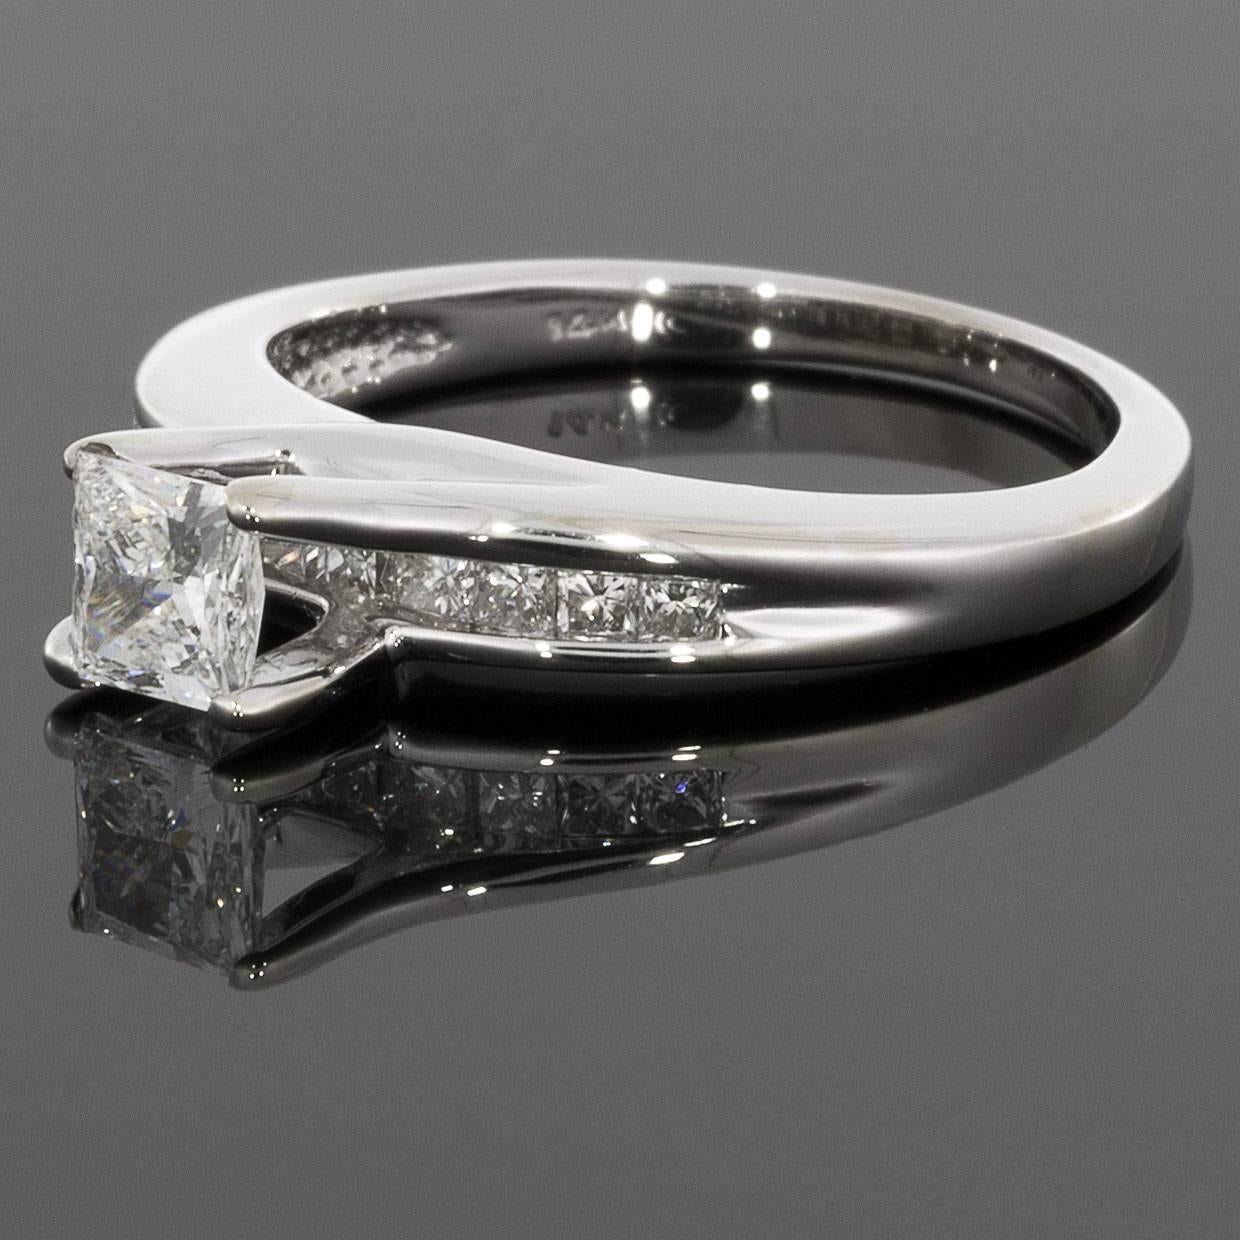 This beautiful diamond engagement ring features sparkly, brilliant princess cut diamonds. These diamonds have a combined total weight of .50 carat & grade as IJ/SI in quality. The center diamond weighs approximately .37 carat. The 14 karat,